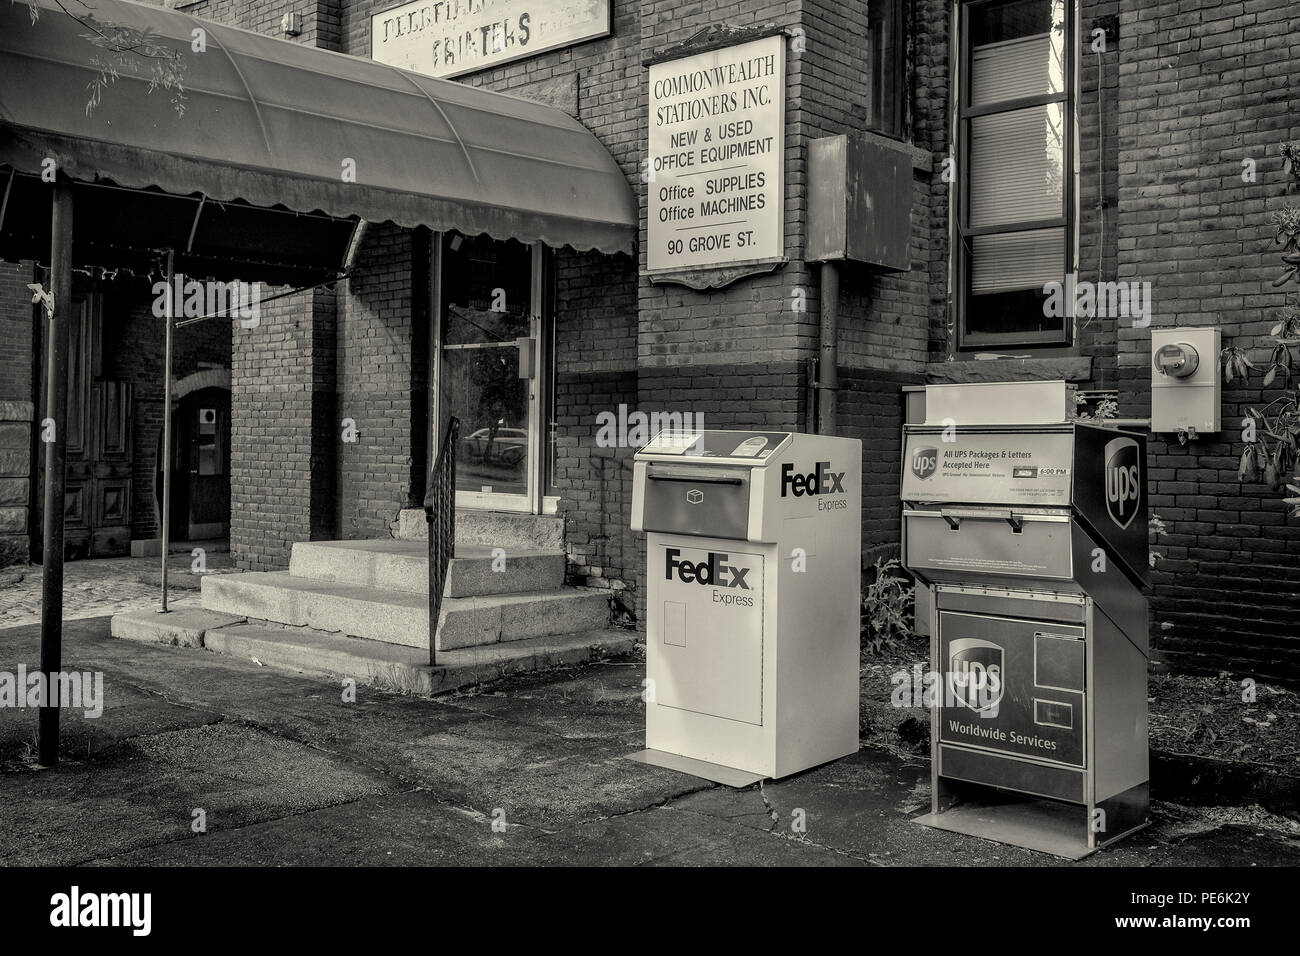 Two mailing boxes - UPS and FEDEX - in front of Commonwealth Stationers on Grove Street in Worcester, MA Stock Photo